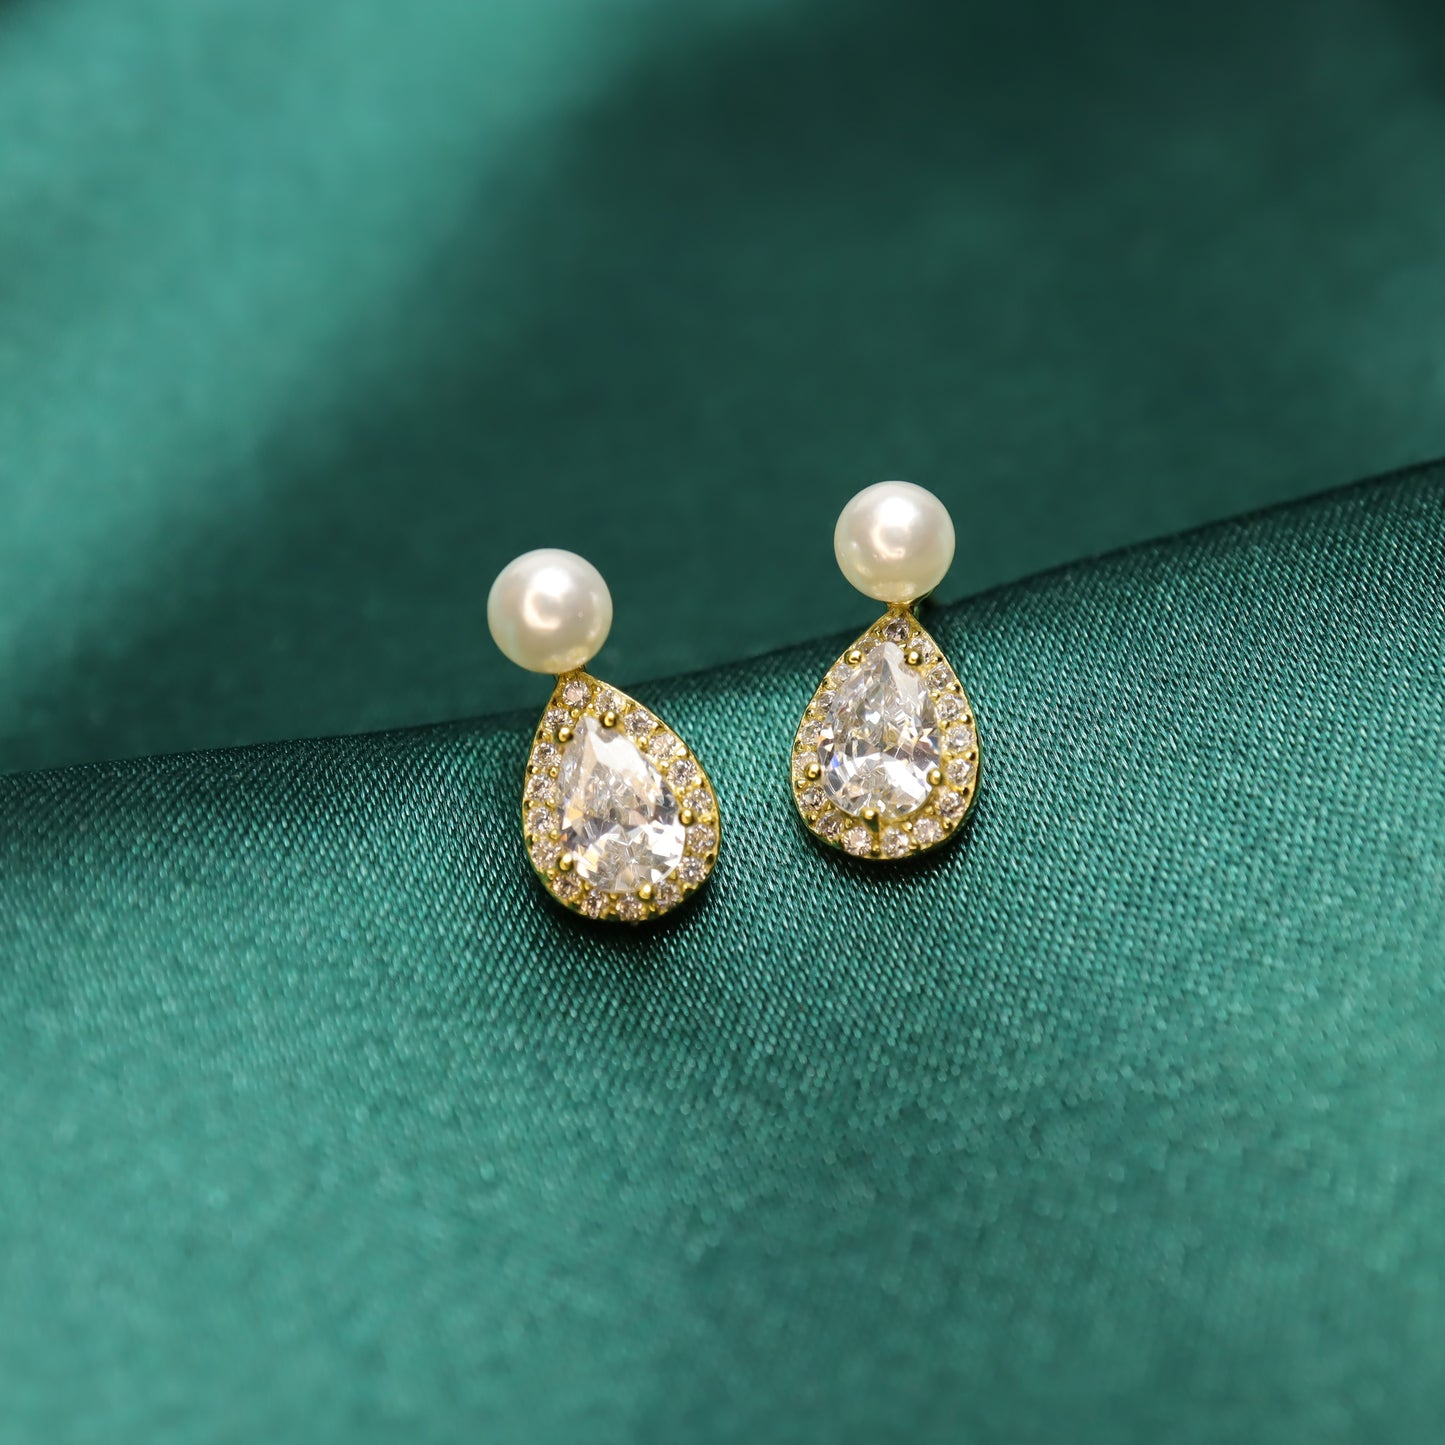 French Noble Pearl S925 Sterling Silver Teardrop Stud Earrings (Color: Gold)